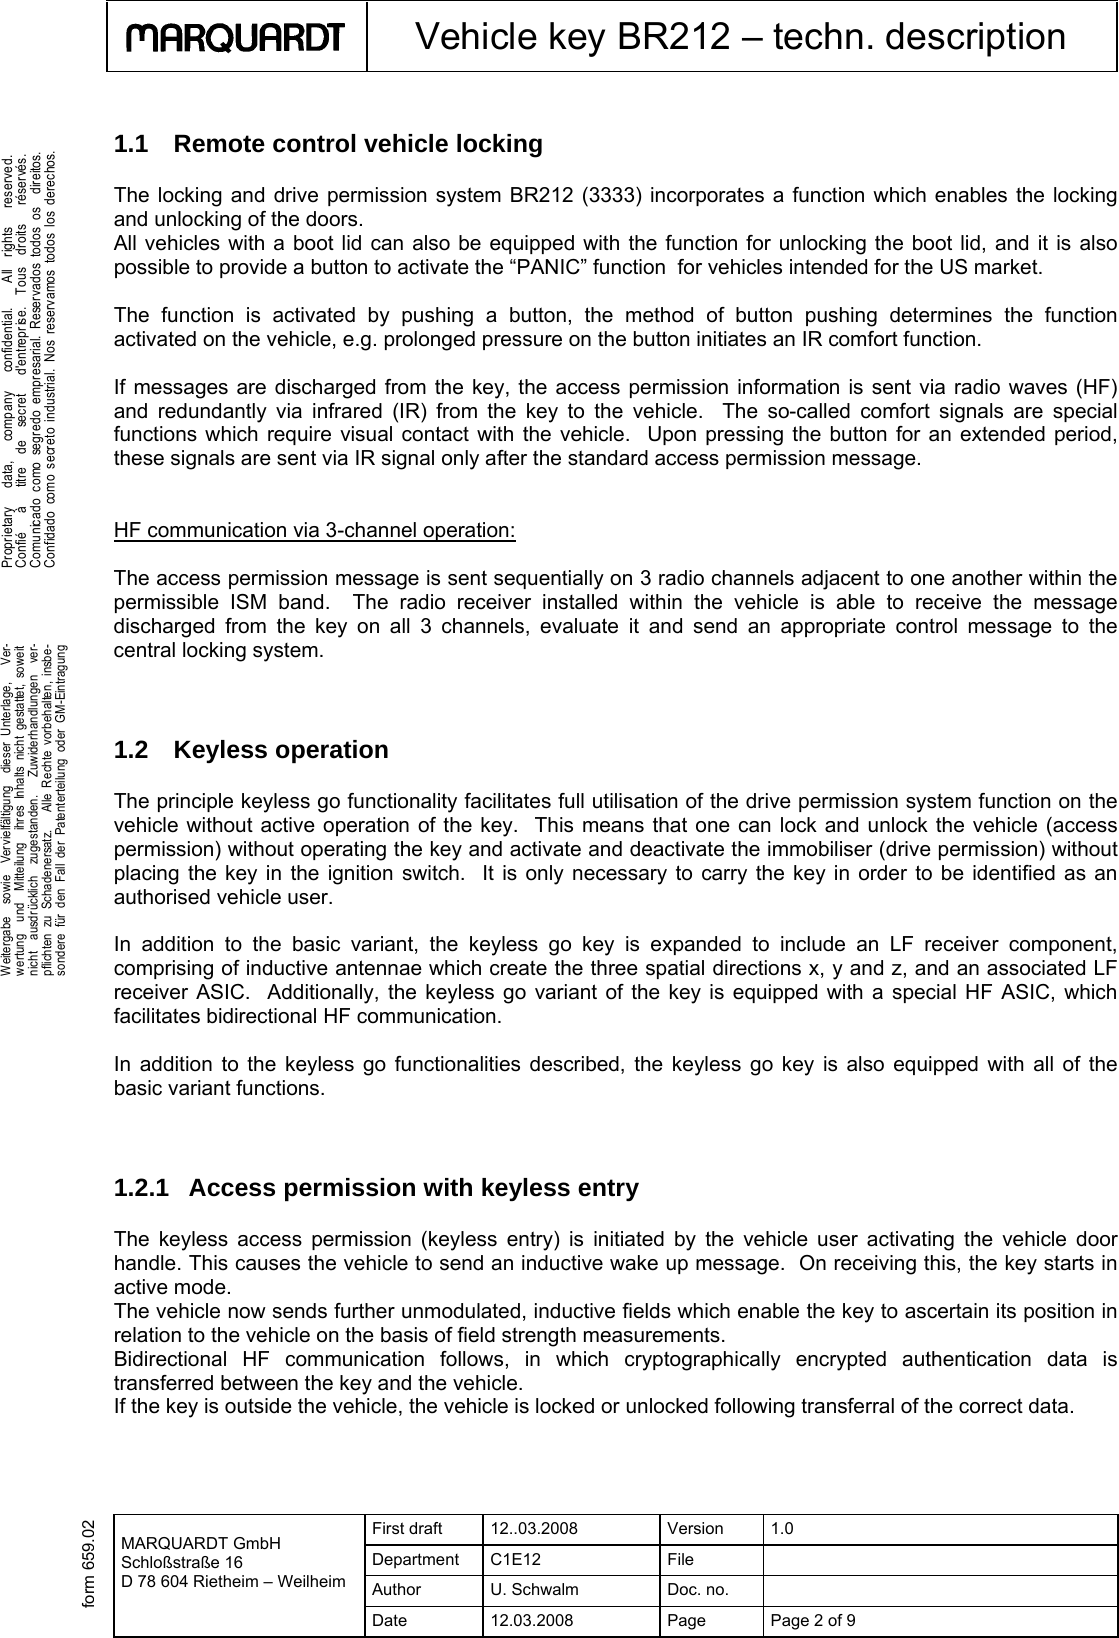  First draft  12..03.2008  Version  1.0 Department C1E12  File   Author U. Schwalm Doc. no.    MARQUARDT GmbH Schloßstraße 16 D 78 604 Rietheim – Weilheim Date  12.03.2008  Page  Page 2 of 9      Vehicle key BR212 – techn. description  .Weitergabe  sowie  Vervielfältigung  dieser Unterlage,   Ver-wertung  und  Mitteilung  ihres Inhalts nicht gestattet, soweitnicht  ausdrücklich  zugestanden.   Zuwiderhandlungen  ver-pflichten zu Schadenersatz.   Alle Rechte vorbehalten, insbe-sondere für den Fall der Patenterteilung oder GM-Eintragung  .Proprietary   data,   company   confidential.    All  rights   reserved.Confié   à   titre  de  secret   d&apos;entreprise.  Tous  droits   réservés.Comunicado como segr edo empresarial. Reservados todos os  direitos.Confidado como secreto industrial. Nos reservamos todos los derechos. form 659.021.1  Remote control vehicle locking The locking and drive permission system BR212 (3333) incorporates a function which enables the locking and unlocking of the doors. All vehicles with a boot lid can also be equipped with the function for unlocking the boot lid, and it is also possible to provide a button to activate the “PANIC” function  for vehicles intended for the US market.  The function is activated by pushing a button, the method of button pushing determines the function activated on the vehicle, e.g. prolonged pressure on the button initiates an IR comfort function.     If messages are discharged from the key, the access permission information is sent via radio waves (HF) and redundantly via infrared (IR) from the key to the vehicle.  The so-called comfort signals are special functions which require visual contact with the vehicle.  Upon pressing the button for an extended period, these signals are sent via IR signal only after the standard access permission message.     HF communication via 3-channel operation:  The access permission message is sent sequentially on 3 radio channels adjacent to one another within the permissible ISM band.  The radio receiver installed within the vehicle is able to receive the message discharged from the key on all 3 channels, evaluate it and send an appropriate control message to the central locking system.    1.2 Keyless operation The principle keyless go functionality facilitates full utilisation of the drive permission system function on the vehicle without active operation of the key.  This means that one can lock and unlock the vehicle (access permission) without operating the key and activate and deactivate the immobiliser (drive permission) without placing the key in the ignition switch.  It is only necessary to carry the key in order to be identified as an authorised vehicle user.    In addition to the basic variant, the keyless go key is expanded to include an LF receiver component, comprising of inductive antennae which create the three spatial directions x, y and z, and an associated LF receiver ASIC.  Additionally, the keyless go variant of the key is equipped with a special HF ASIC, which facilitates bidirectional HF communication.   In addition to the keyless go functionalities described, the keyless go key is also equipped with all of the basic variant functions.     1.2.1 Access permission with keyless entry The keyless access permission (keyless entry) is initiated by the vehicle user activating the vehicle door handle. This causes the vehicle to send an inductive wake up message.  On receiving this, the key starts in active mode.  The vehicle now sends further unmodulated, inductive fields which enable the key to ascertain its position in relation to the vehicle on the basis of field strength measurements.  Bidirectional HF communication follows, in which cryptographically encrypted authentication data is transferred between the key and the vehicle.  If the key is outside the vehicle, the vehicle is locked or unlocked following transferral of the correct data.   